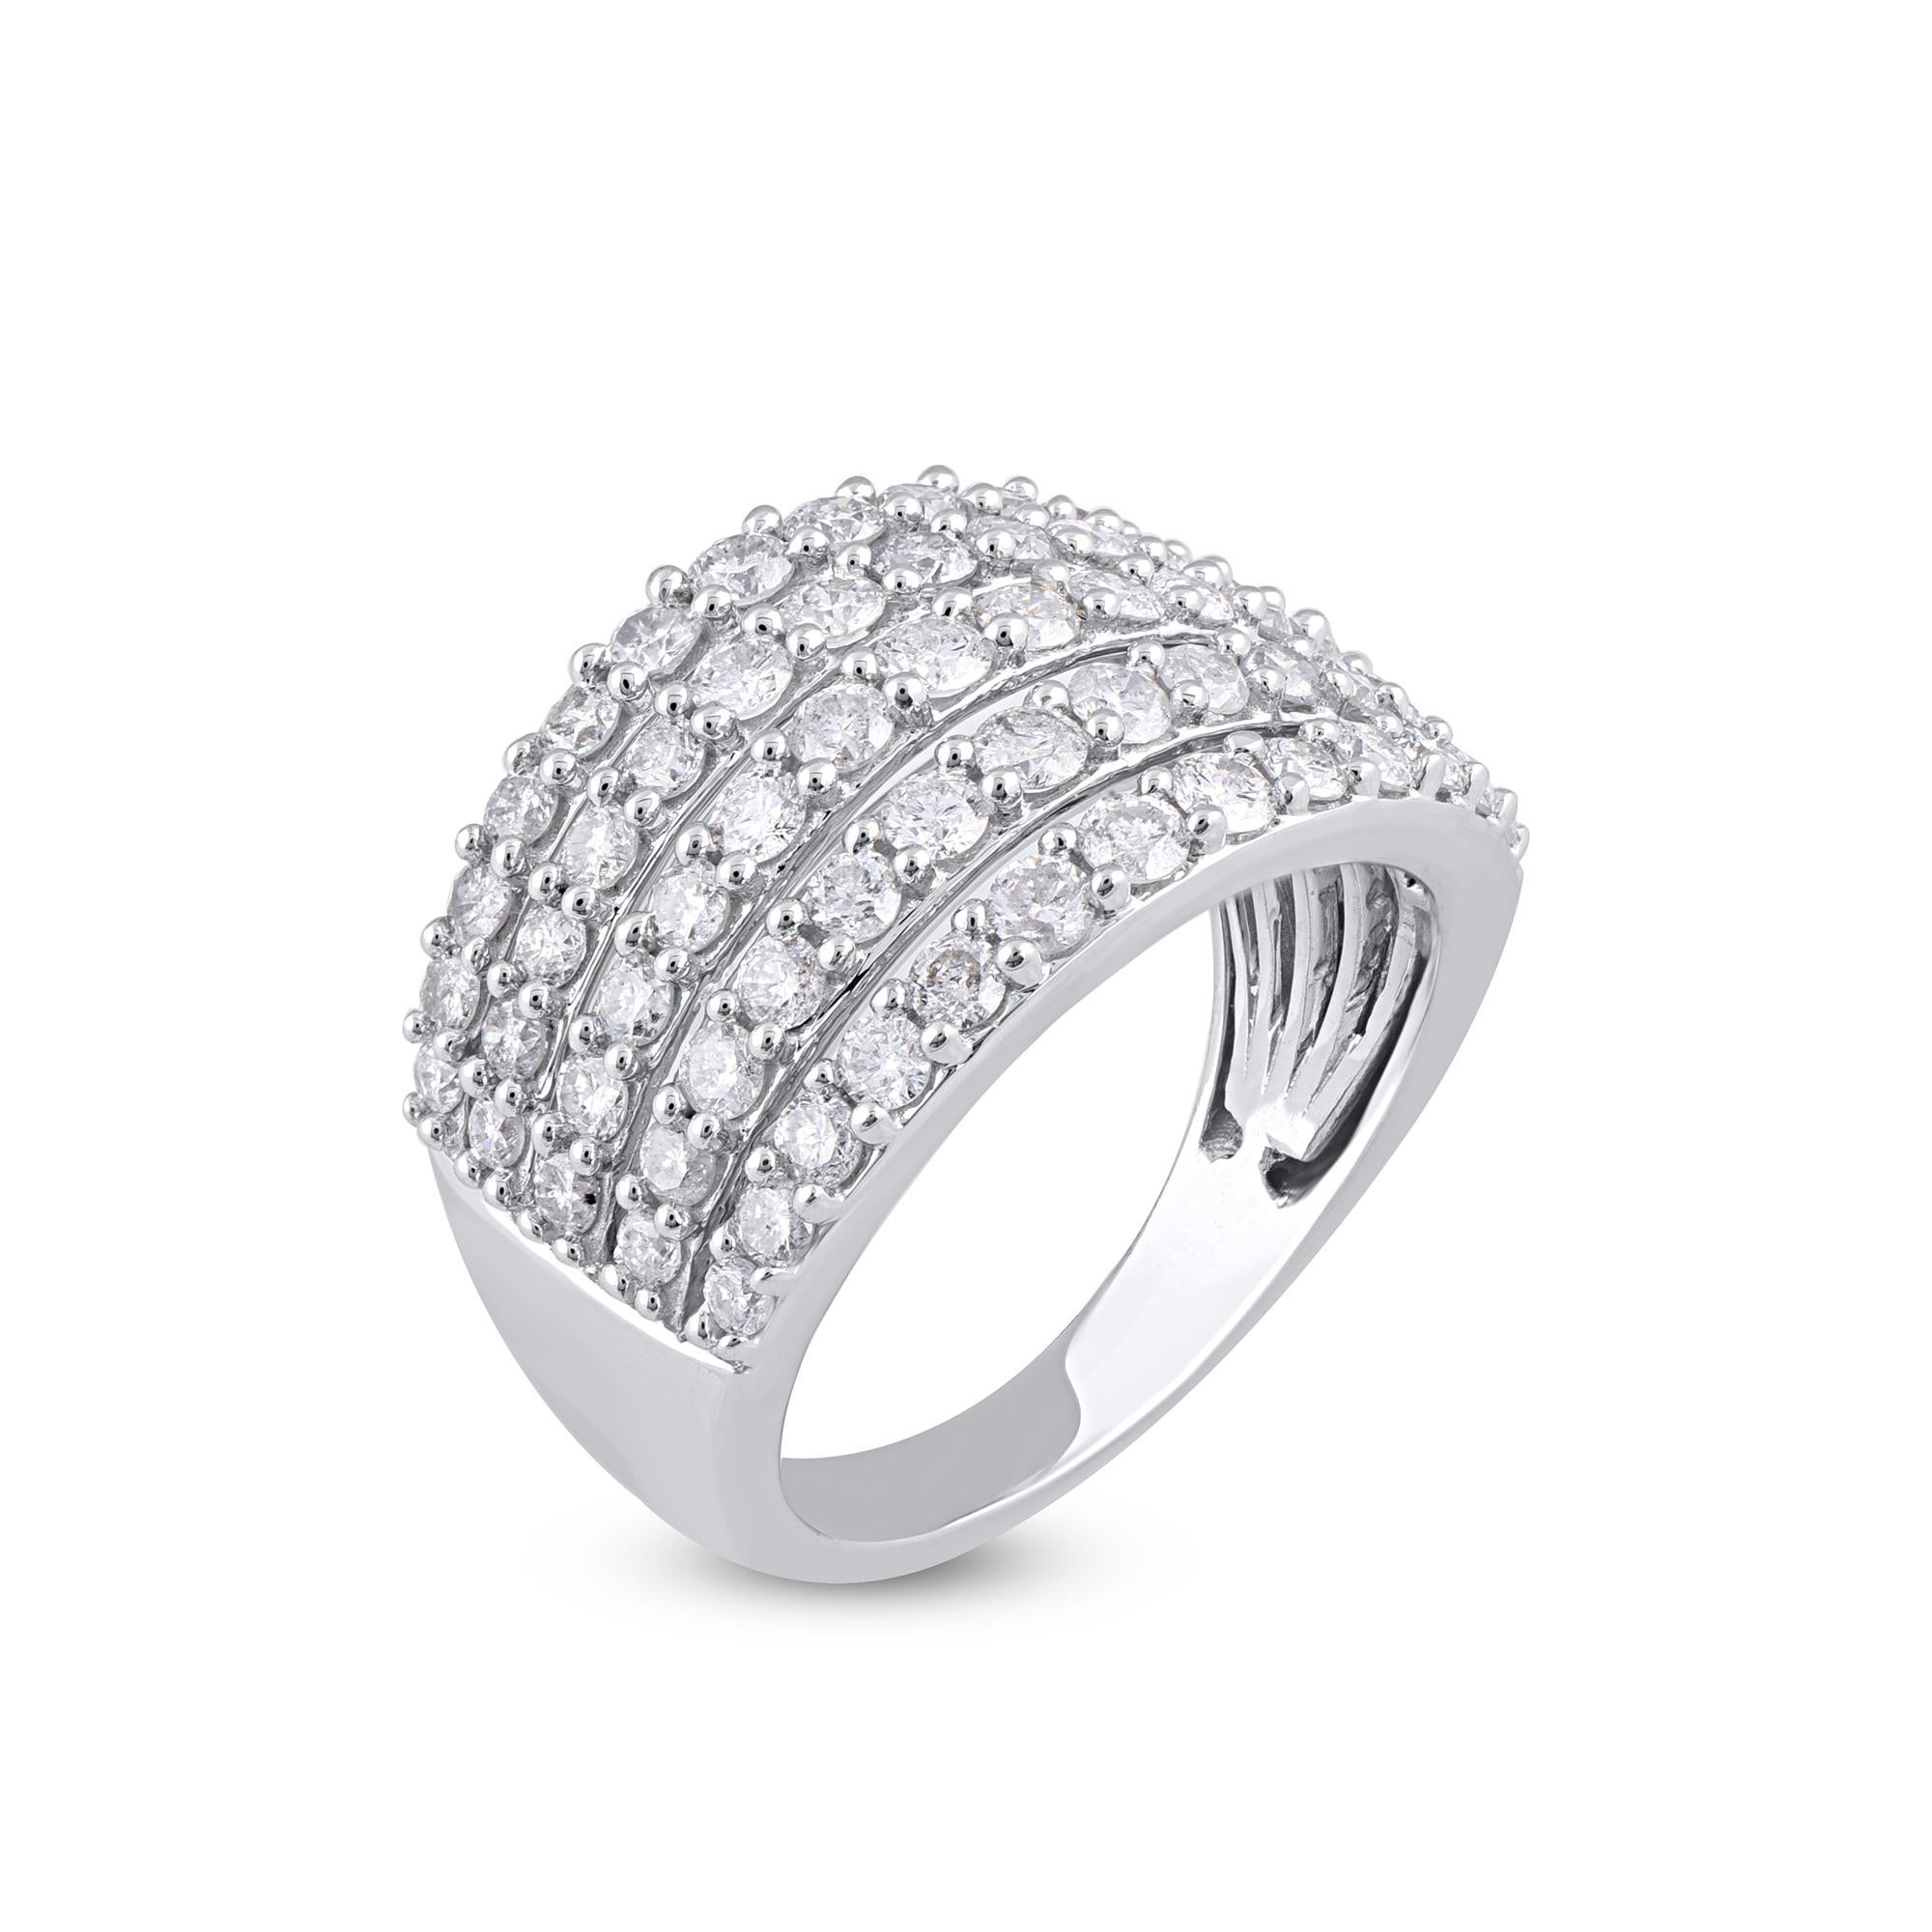 Stunning and classic, this diamond ring is beautifully crafted in 14K Solid White gold. This band ring features a sparkling 65 brilliant cut diamonds beautifully set in prong setting. The total diamond weight is 2.0 Carat. The diamonds are graded as